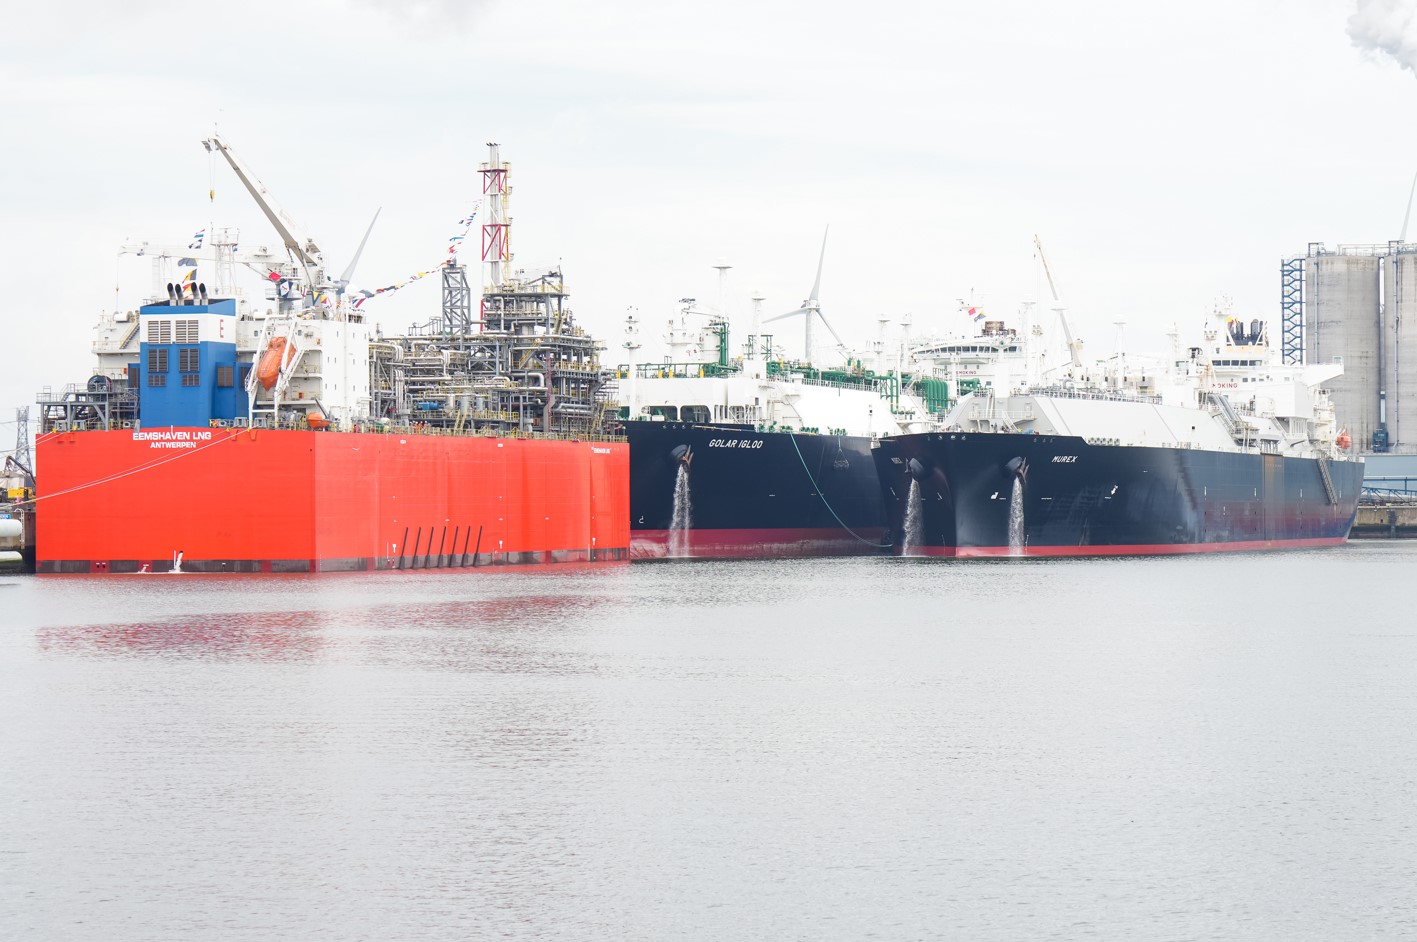 Gasunie resumes Eemshaven LNG sendout, expects LNG carrier on February 13